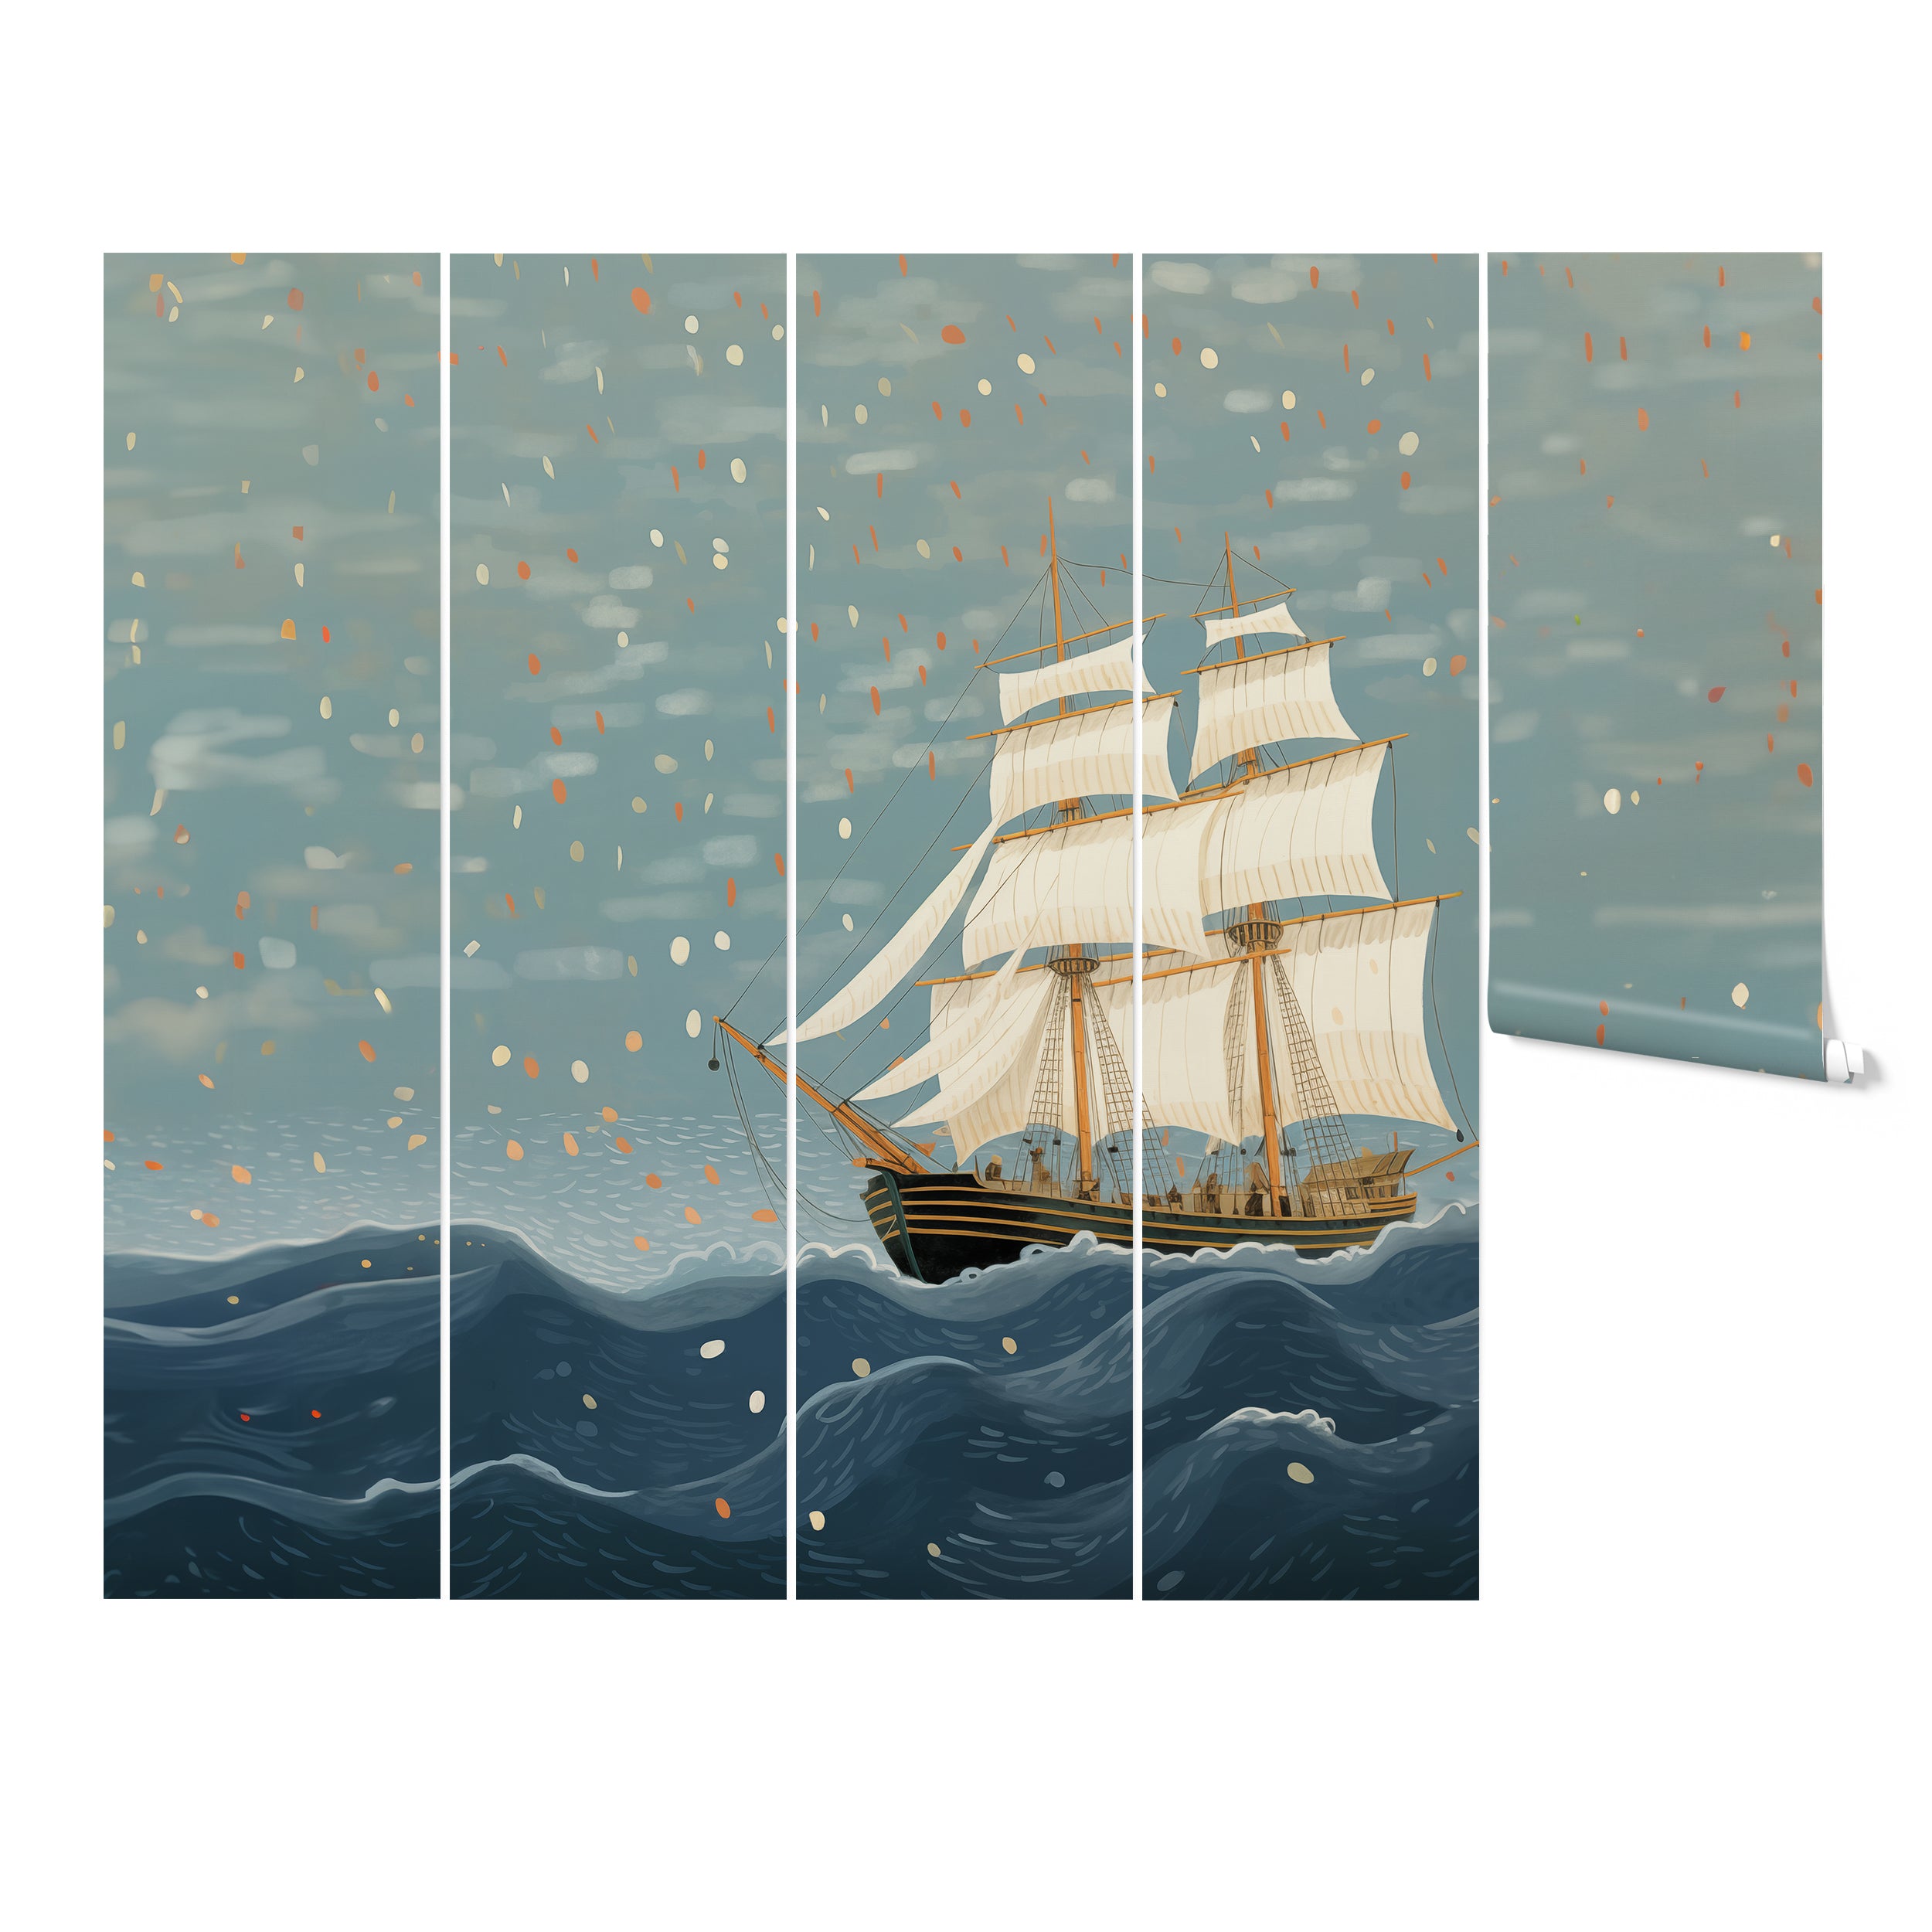 with nautical theme featuring a ship sailing mural on the wall,